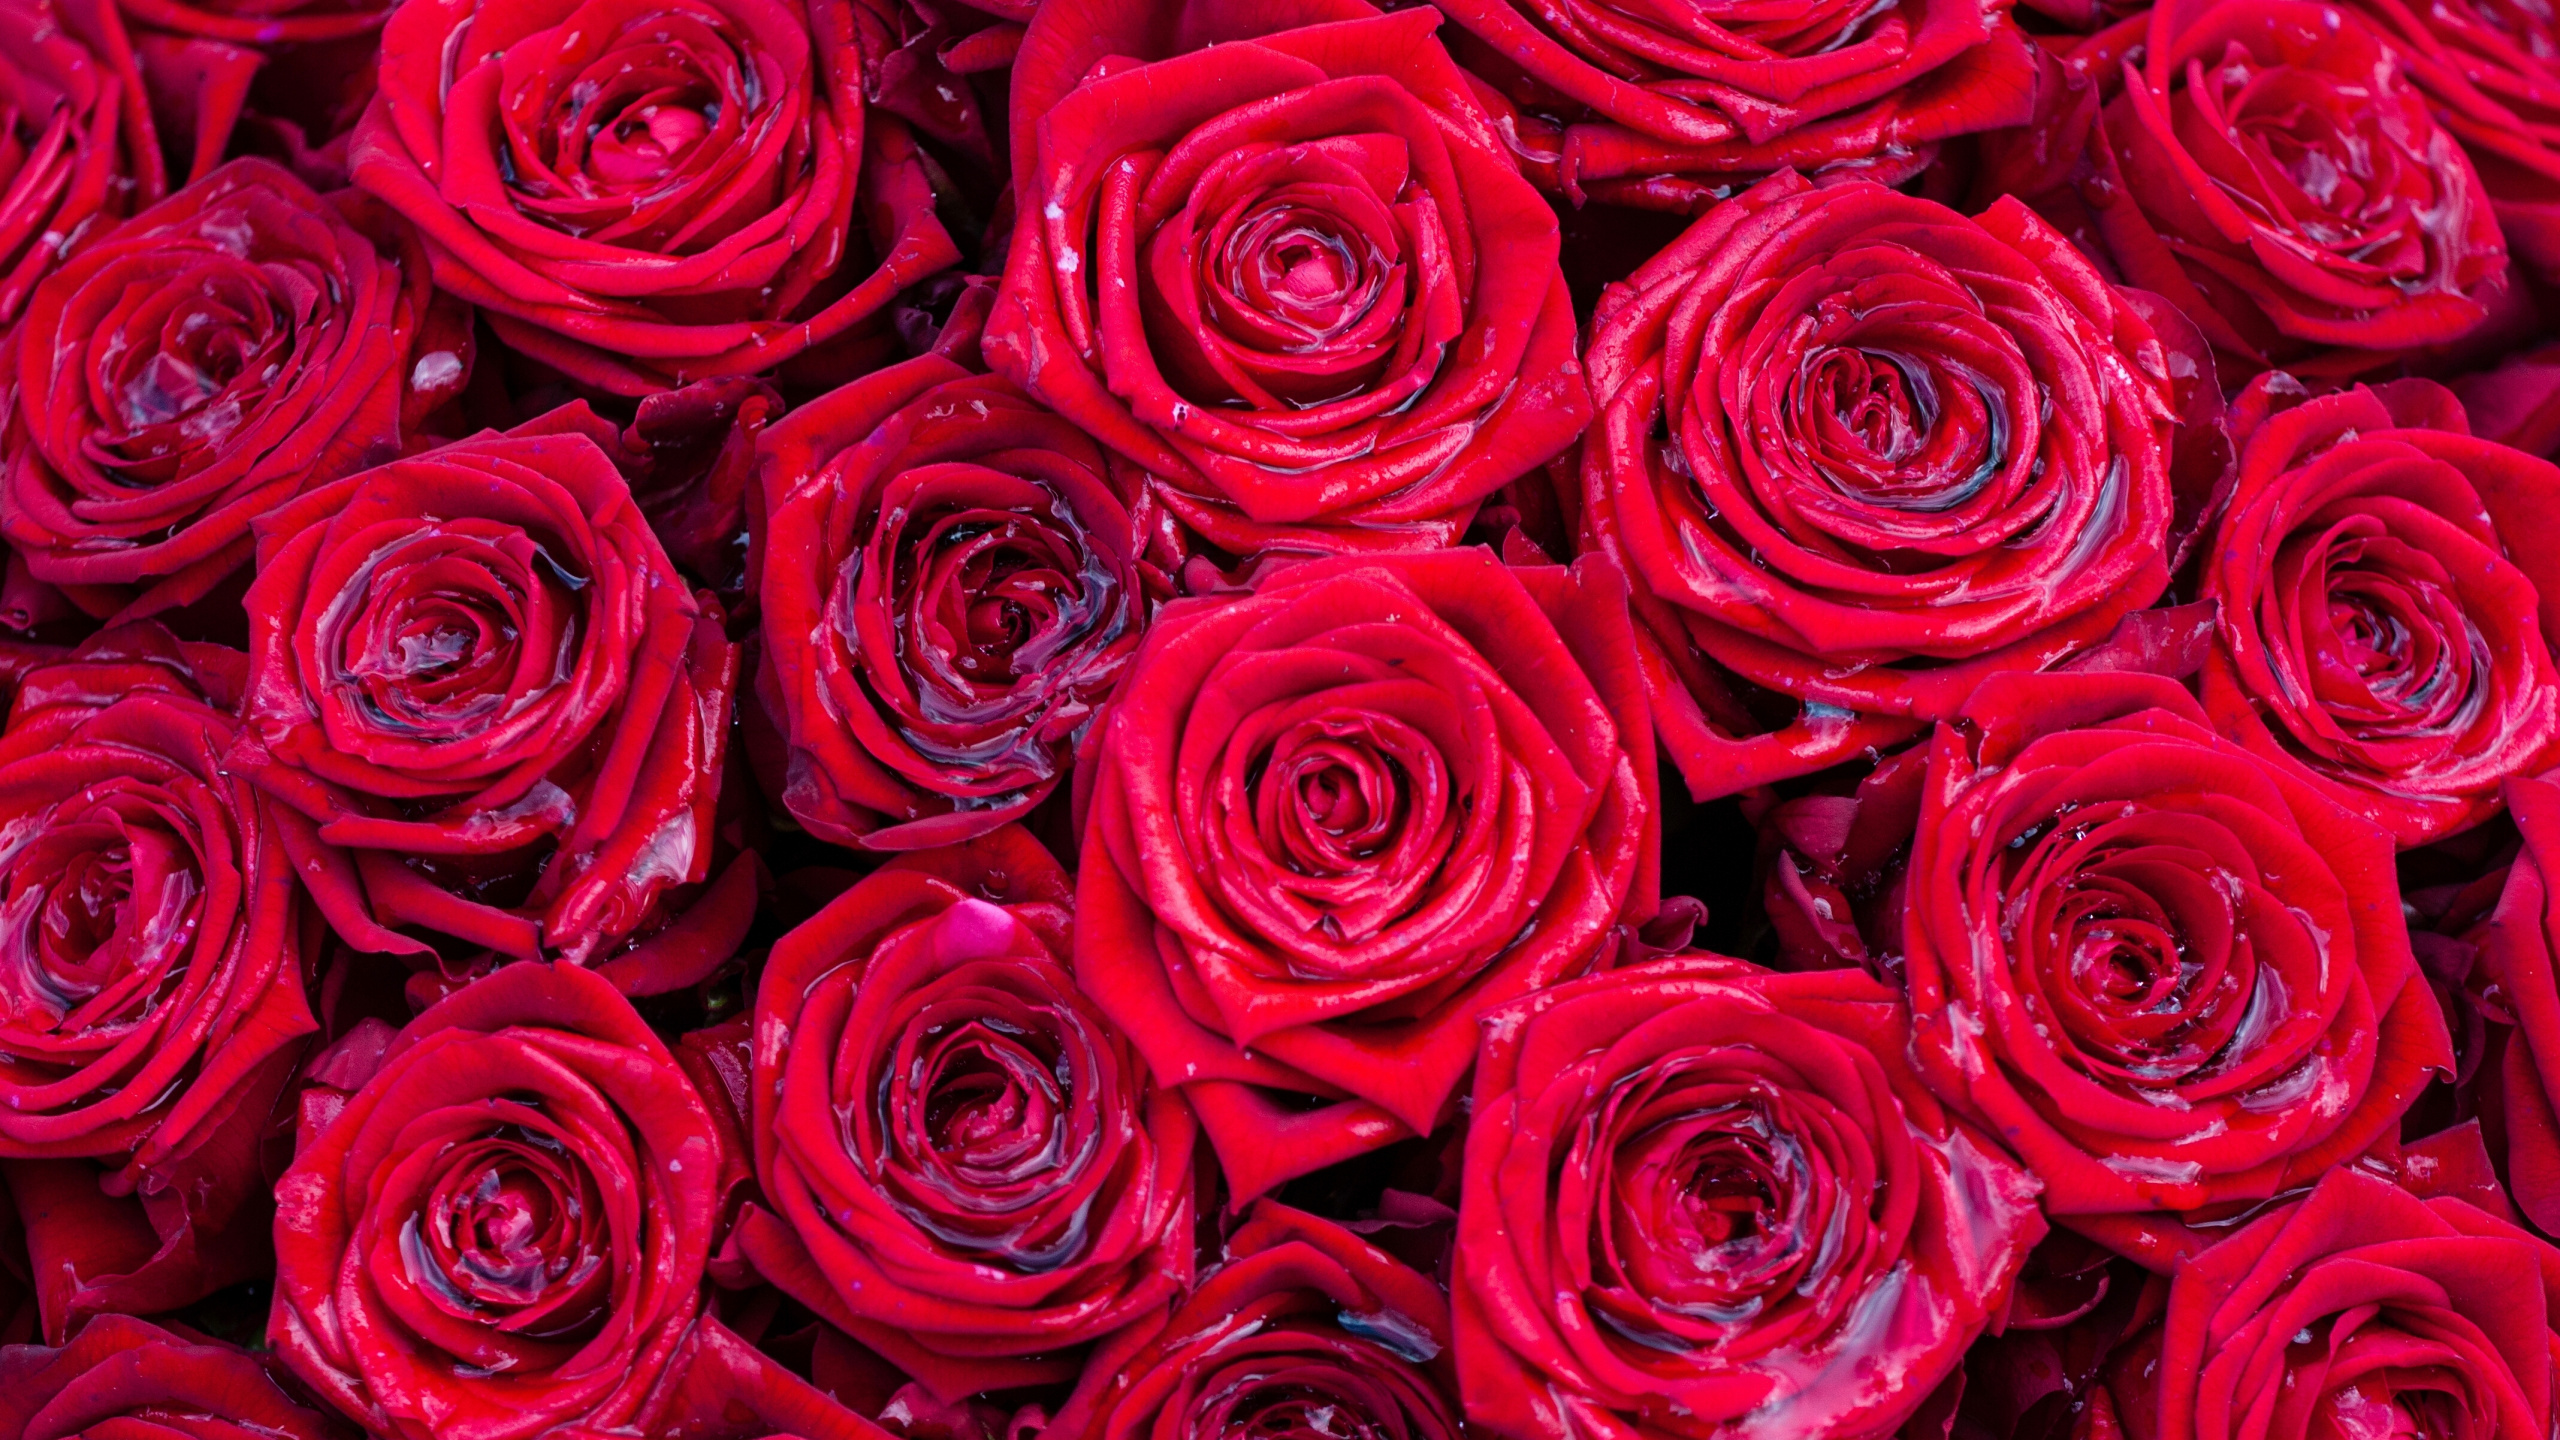 Roses Rouges en Photographie Rapprochée. Wallpaper in 2560x1440 Resolution